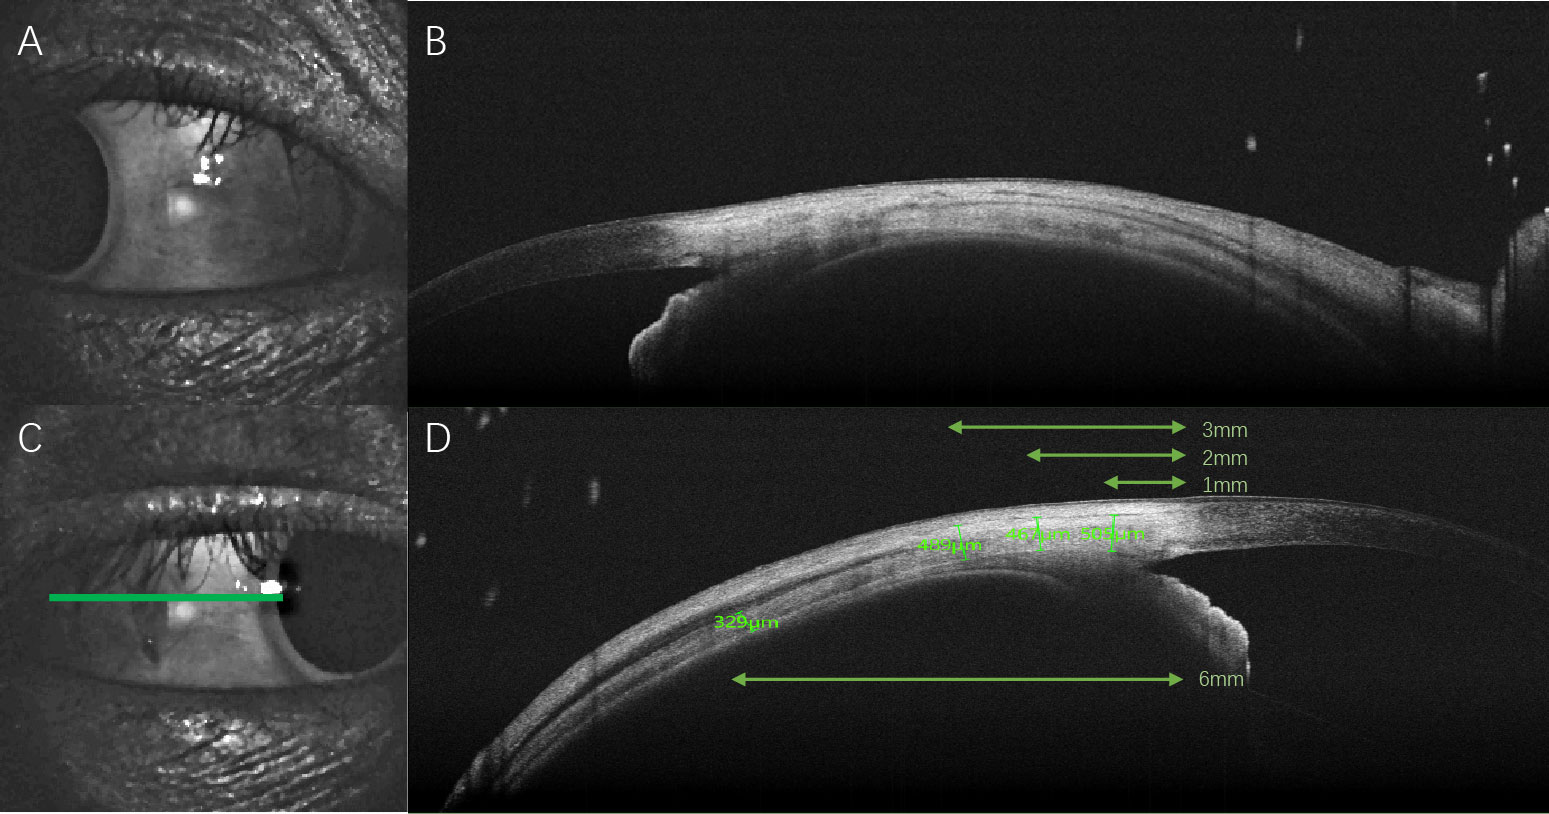 A Thicker Sclera Was Found In SLE Patients Even Without Scleritis by Using SS-OCT